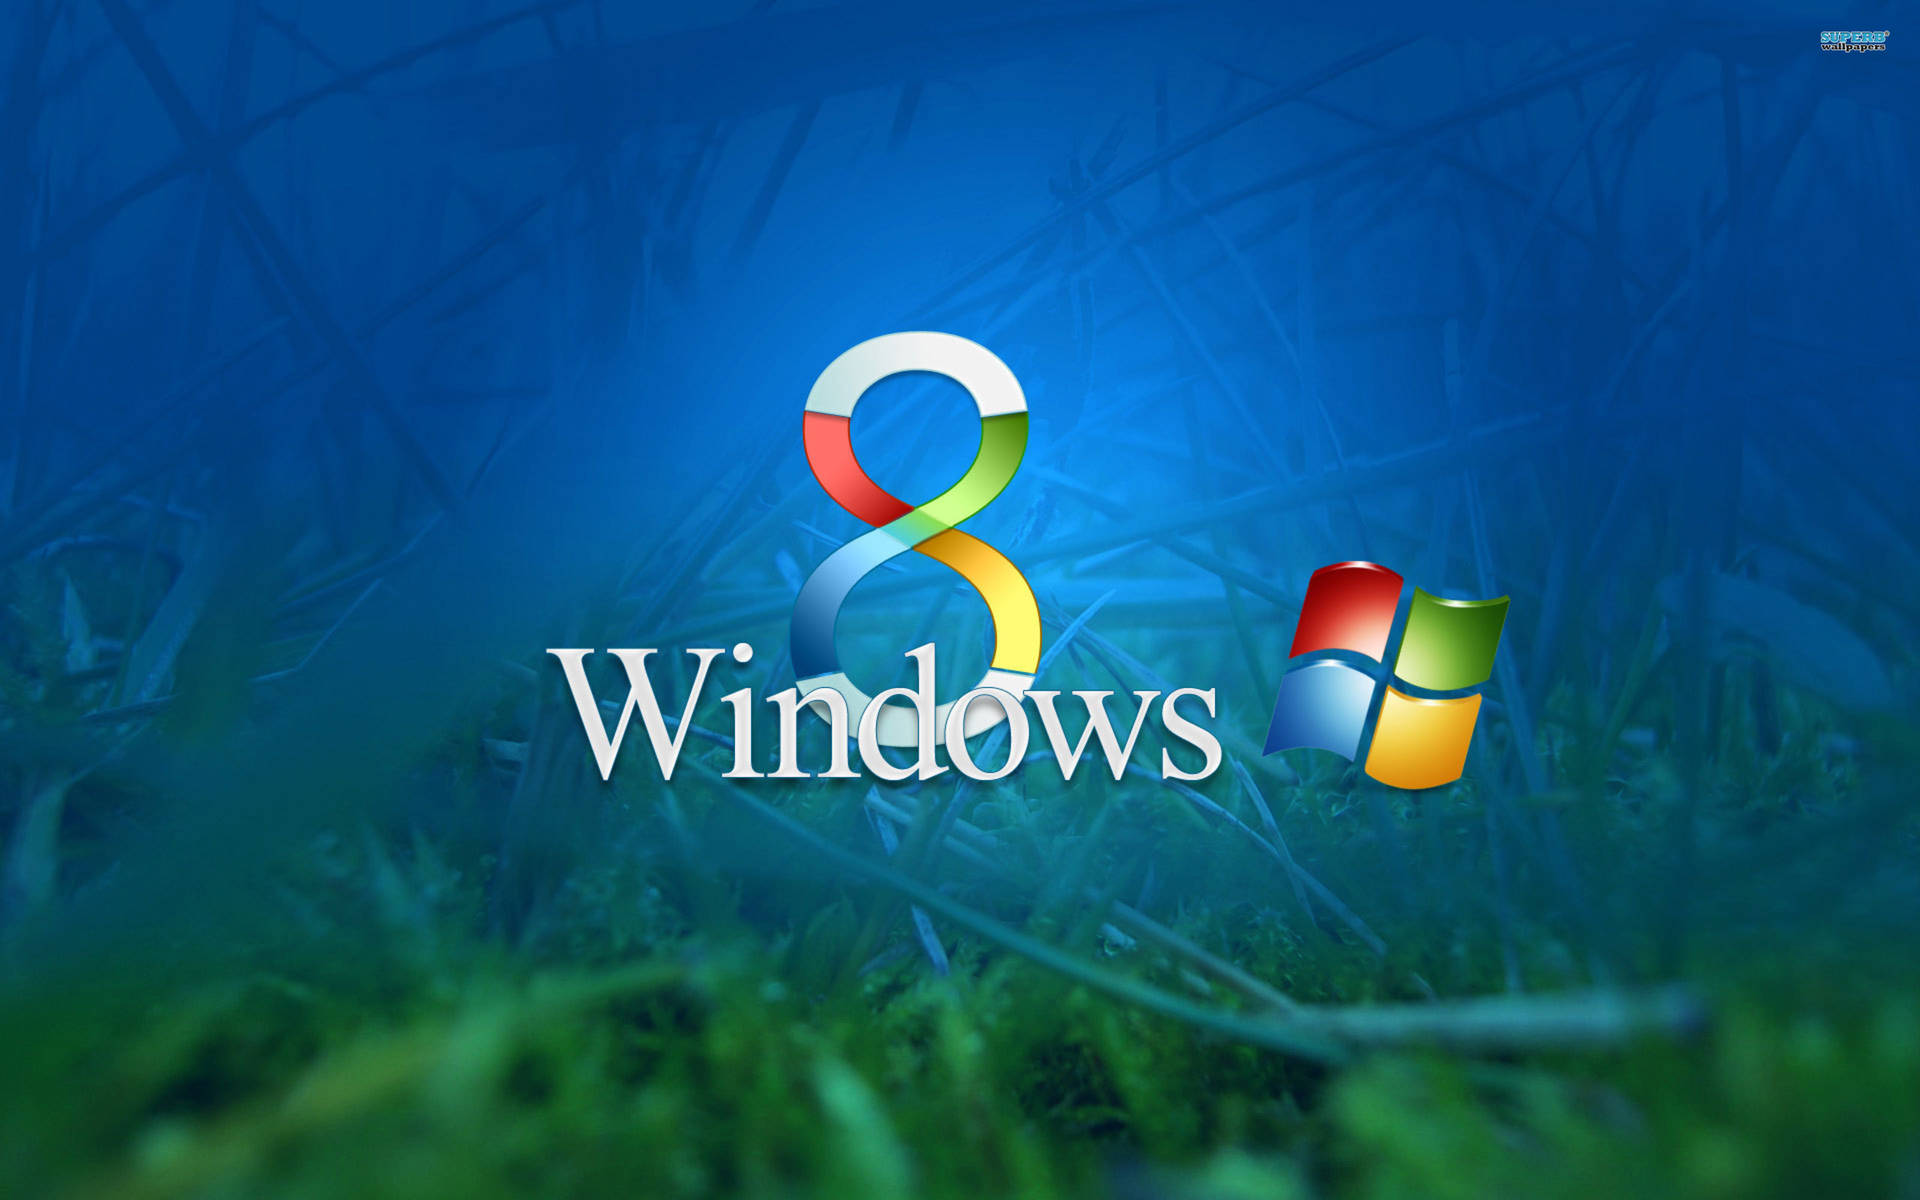 Windows 8 Grassy And Blue Background Wallpaper